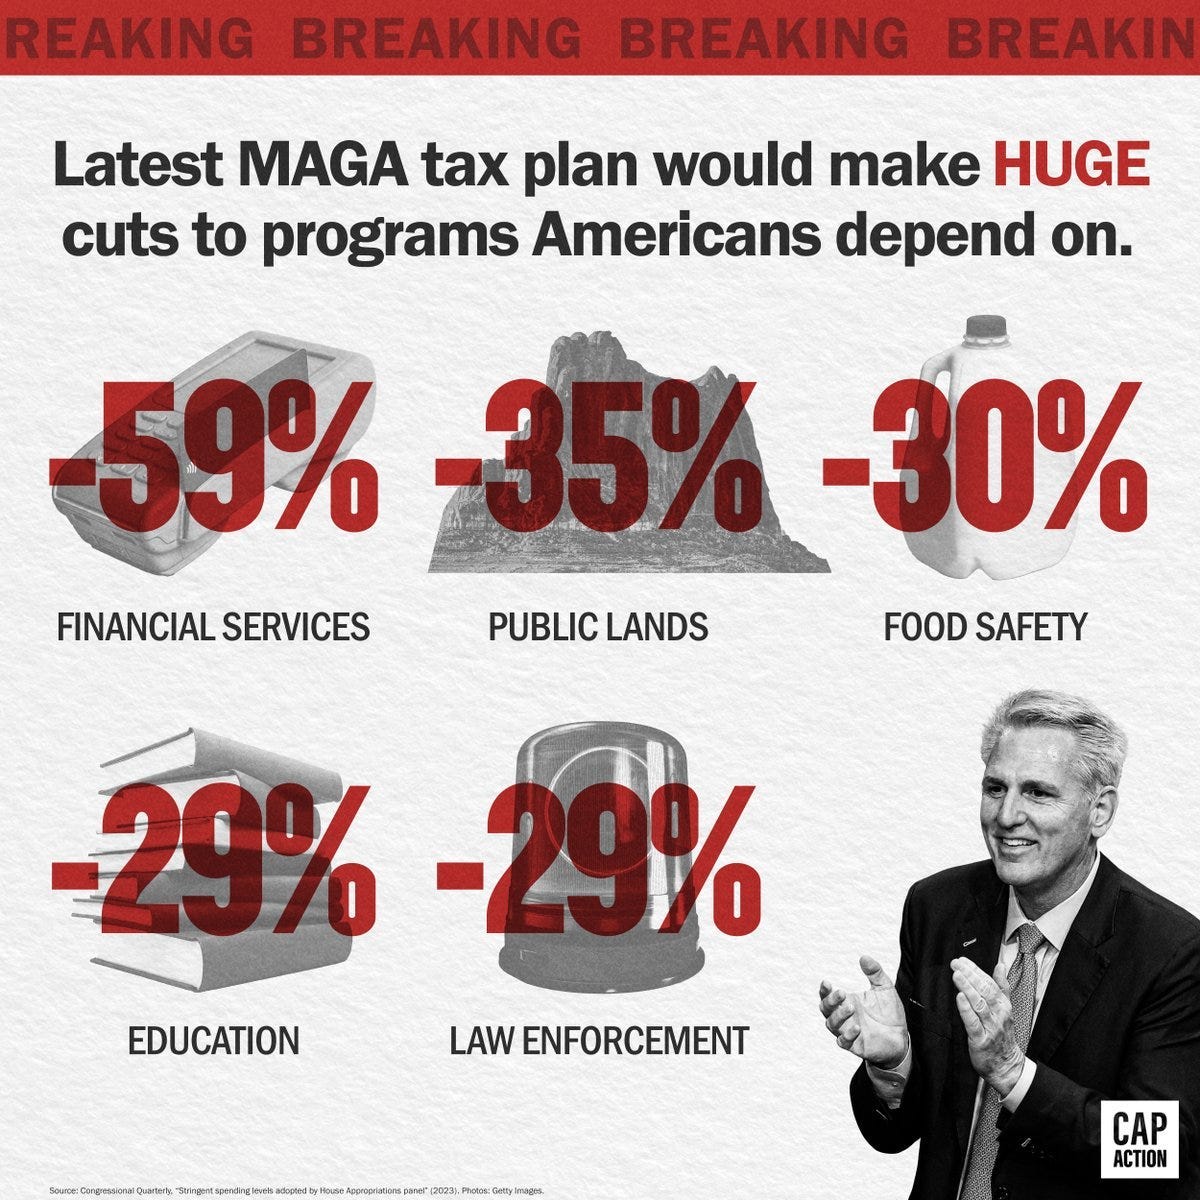 Image description: Text reads: “BREAKING: Latest MAGA tax plan would make HUGE cuts to programs Americans depend on.” Below are programs that would be cut: -59% for financial services, -35% for public lands, -30% for food safety, -29% for education, -29% for law enforcement. To the bottom right is a picture of Kevin McCarthy mid-clap.